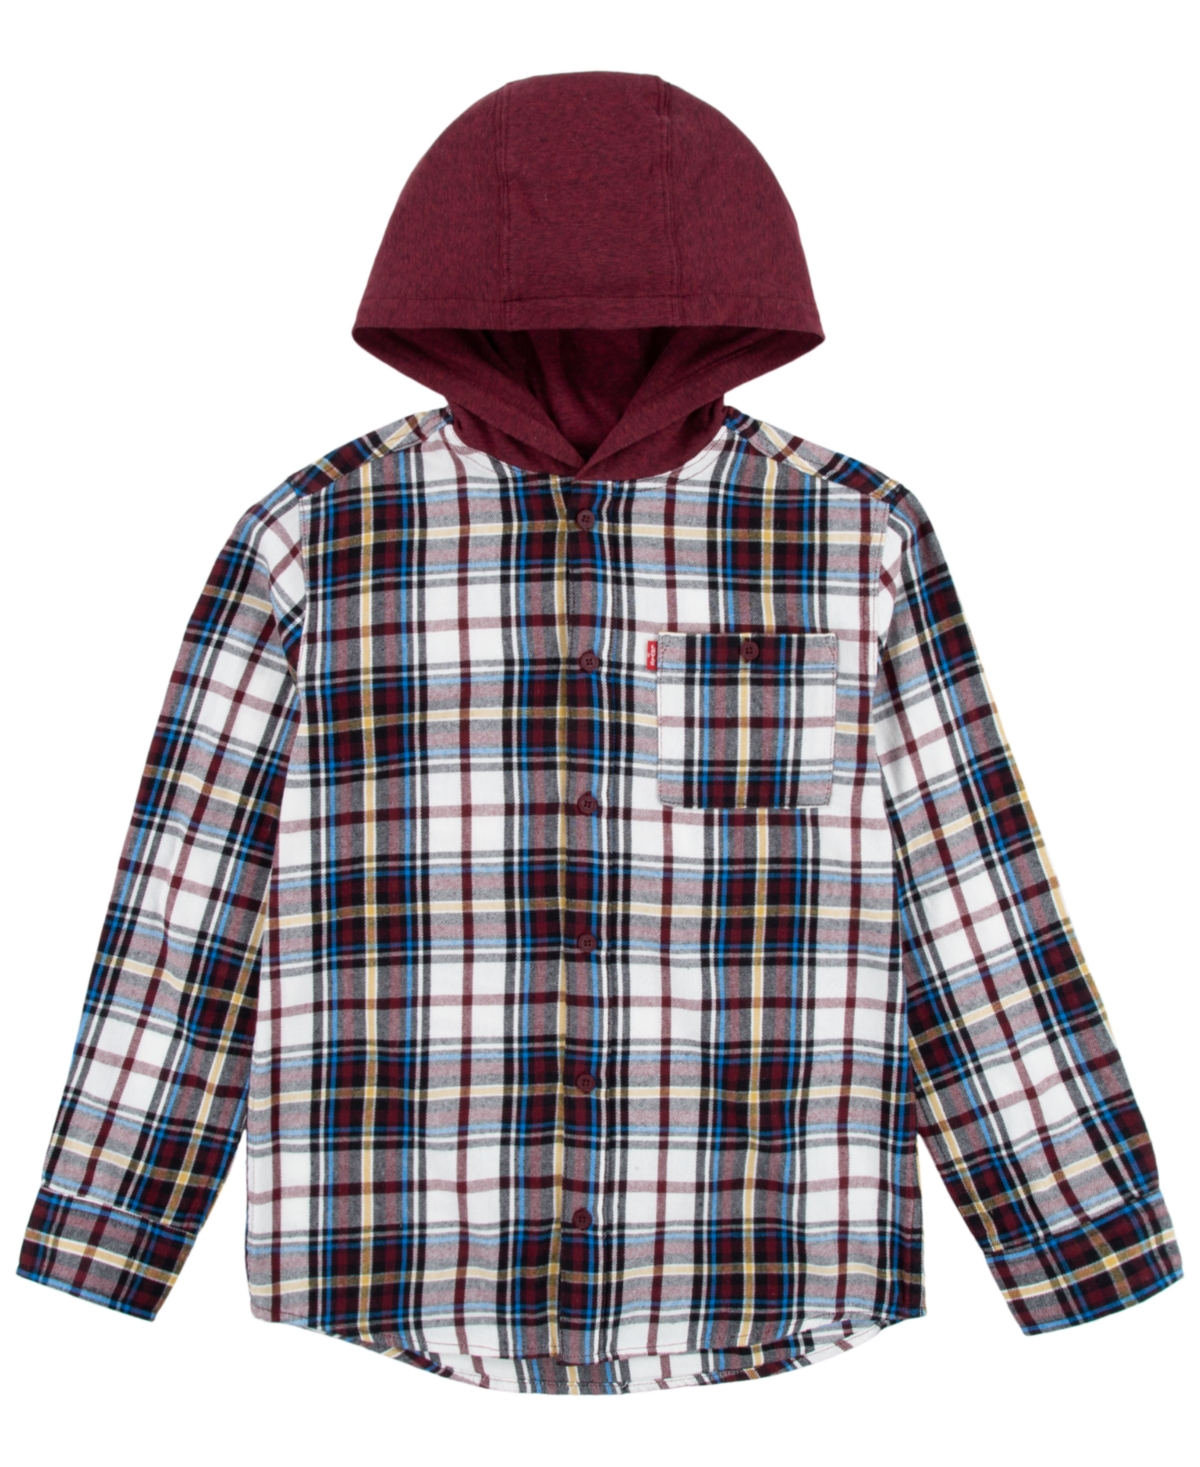 Levi's Toddler Boys Hooded Plaid Flannel Shirt